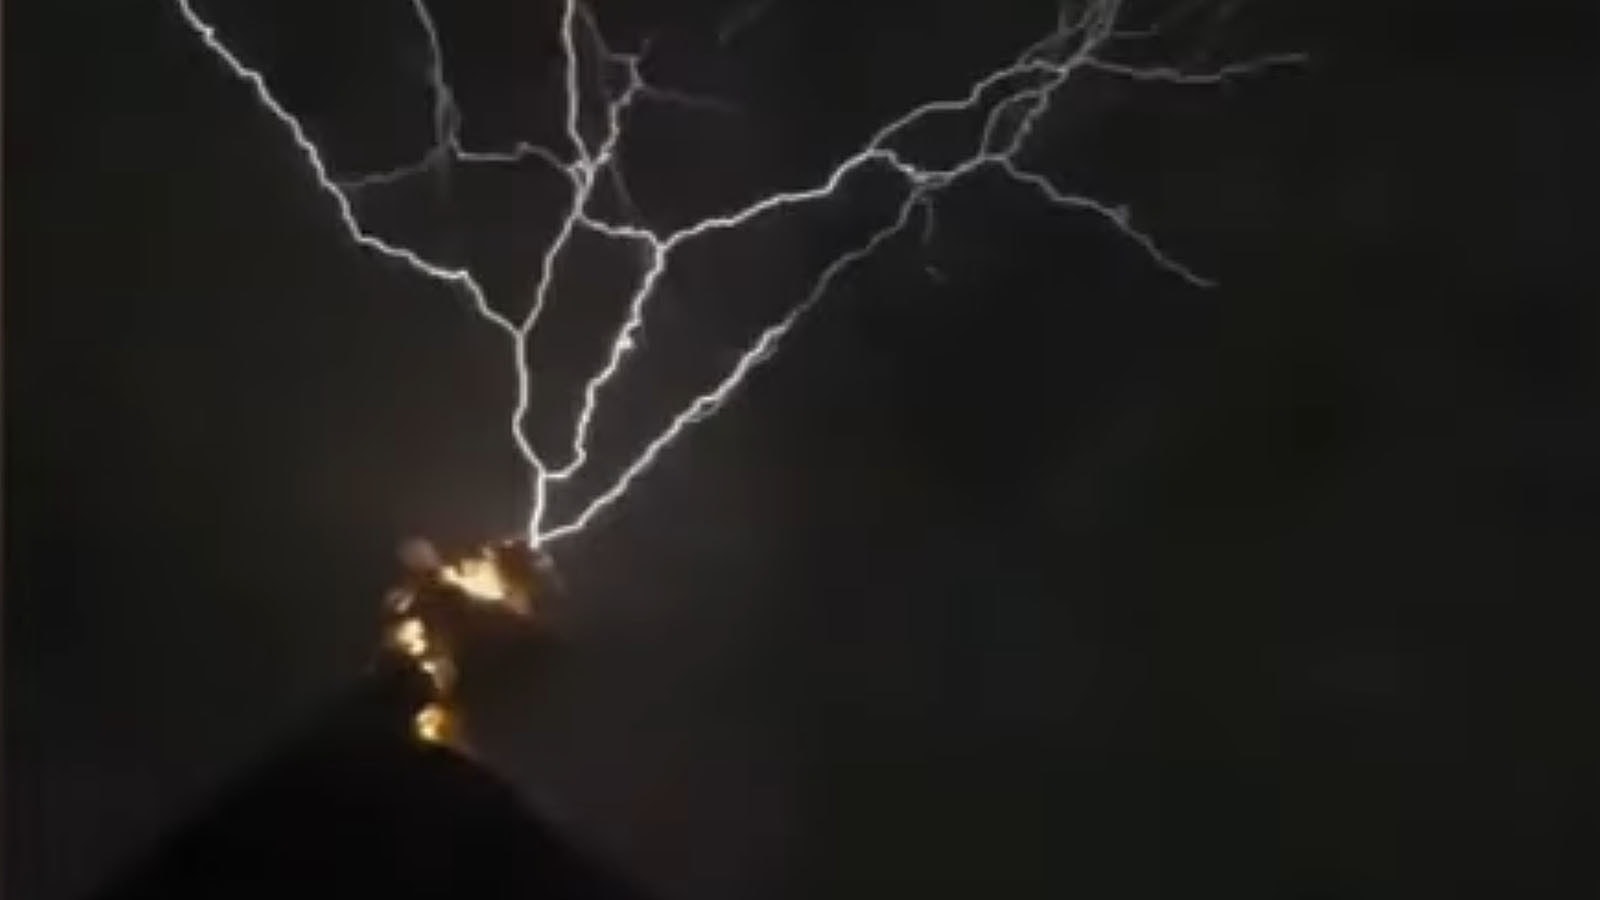 Images from a viral video showing lightning striking an erupting volcano in Guatemala.